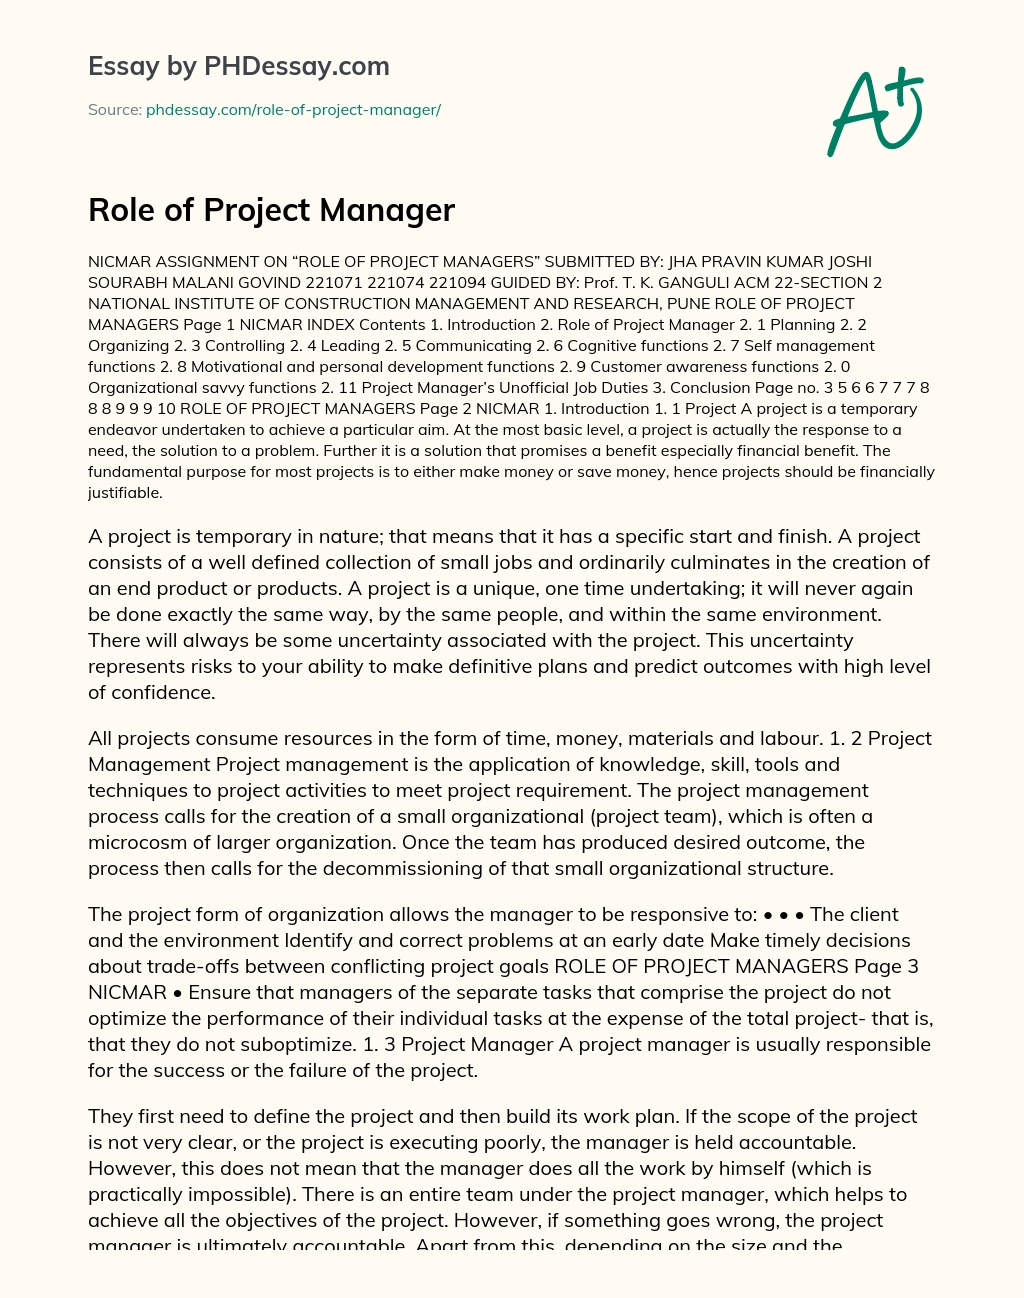 Role of Project Manager essay